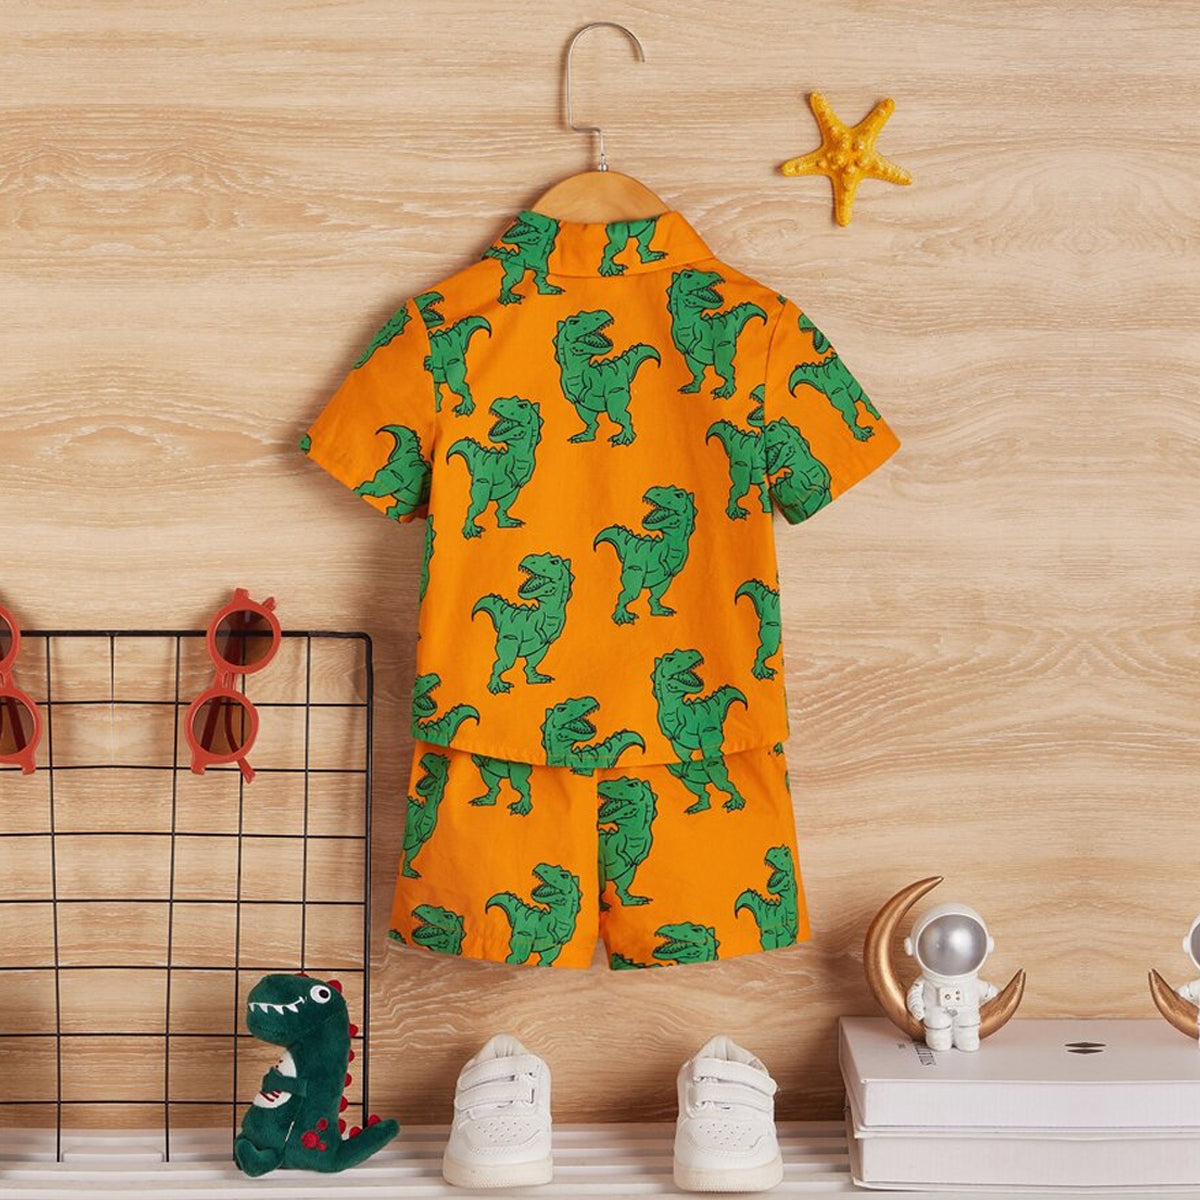 Venutaloza Baby Set Floral & Dinosaur (Combo Pack Of 2) Shirt & Shorts Without tee Two Piece Set For Boy & Girls.